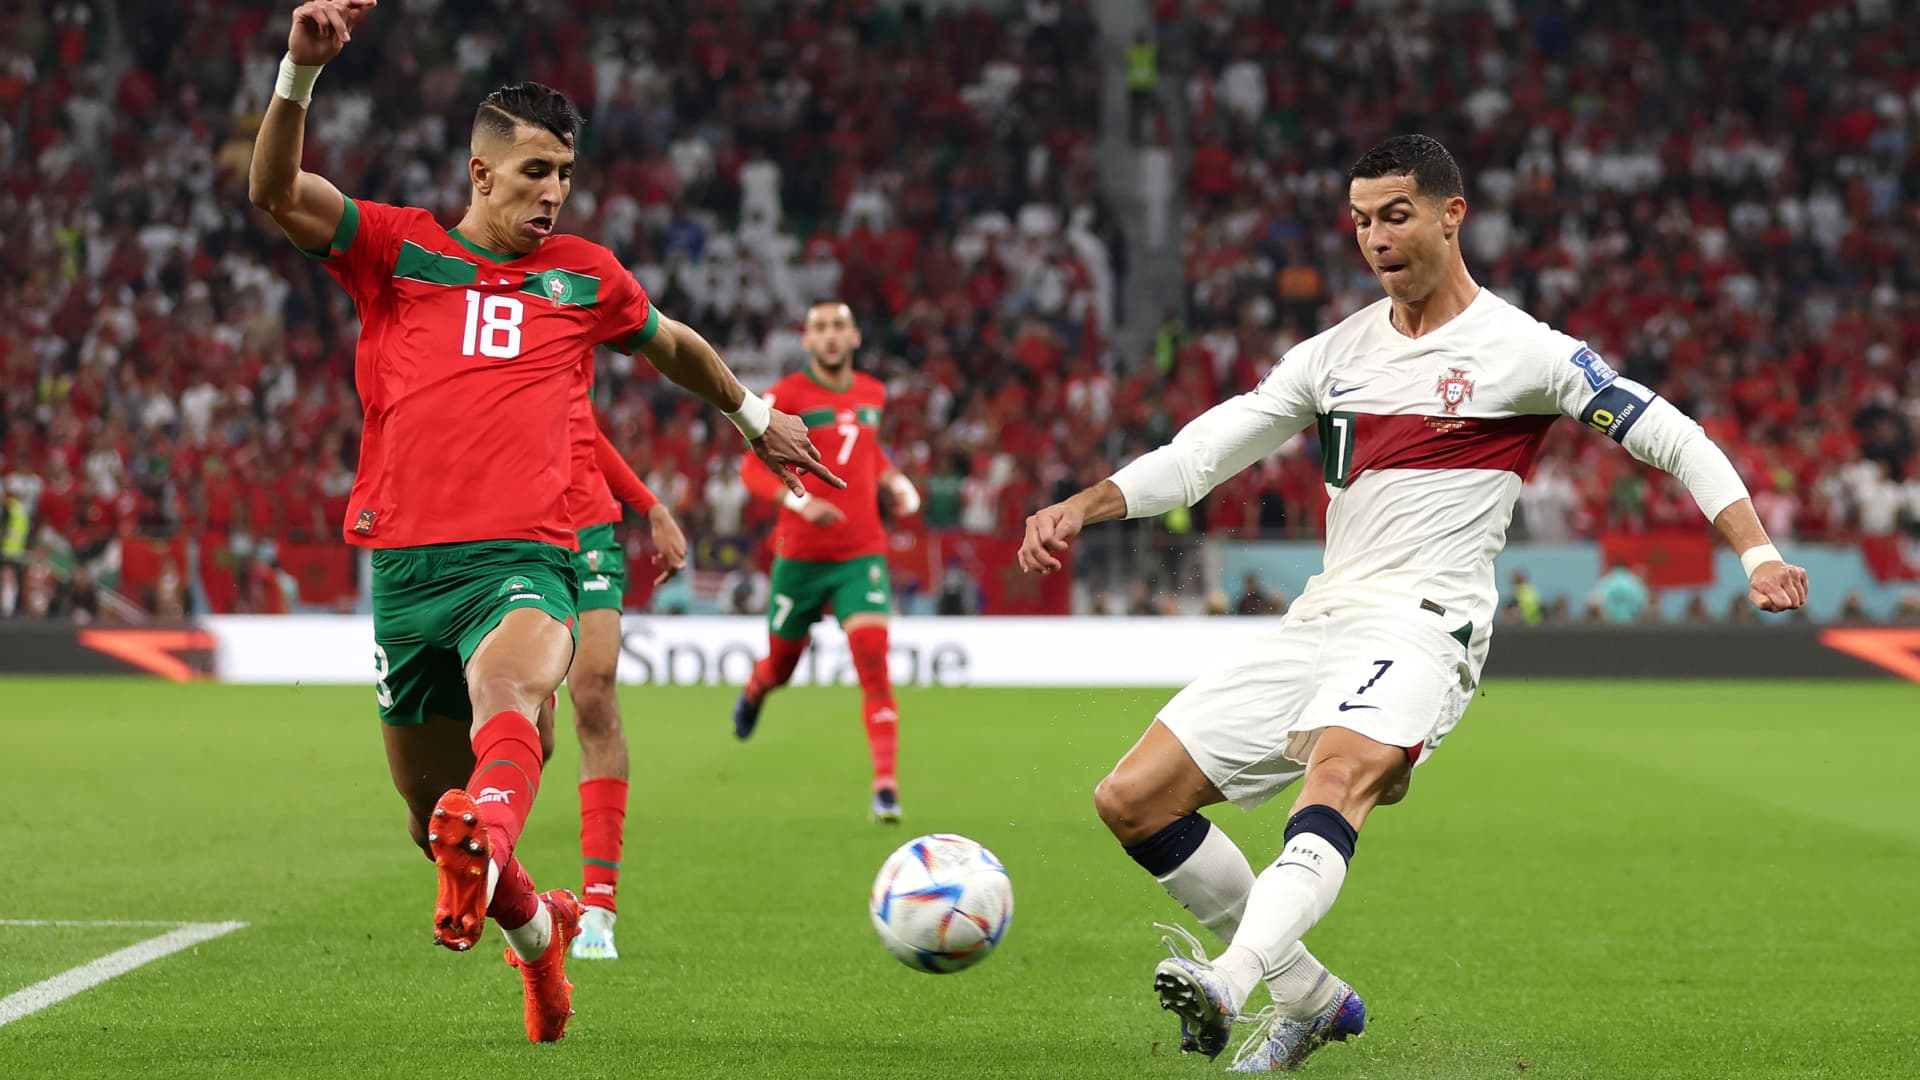 FIFA 2030 World Cup to be hosted by Morocco, Spain and Portugal, with opening games in South America